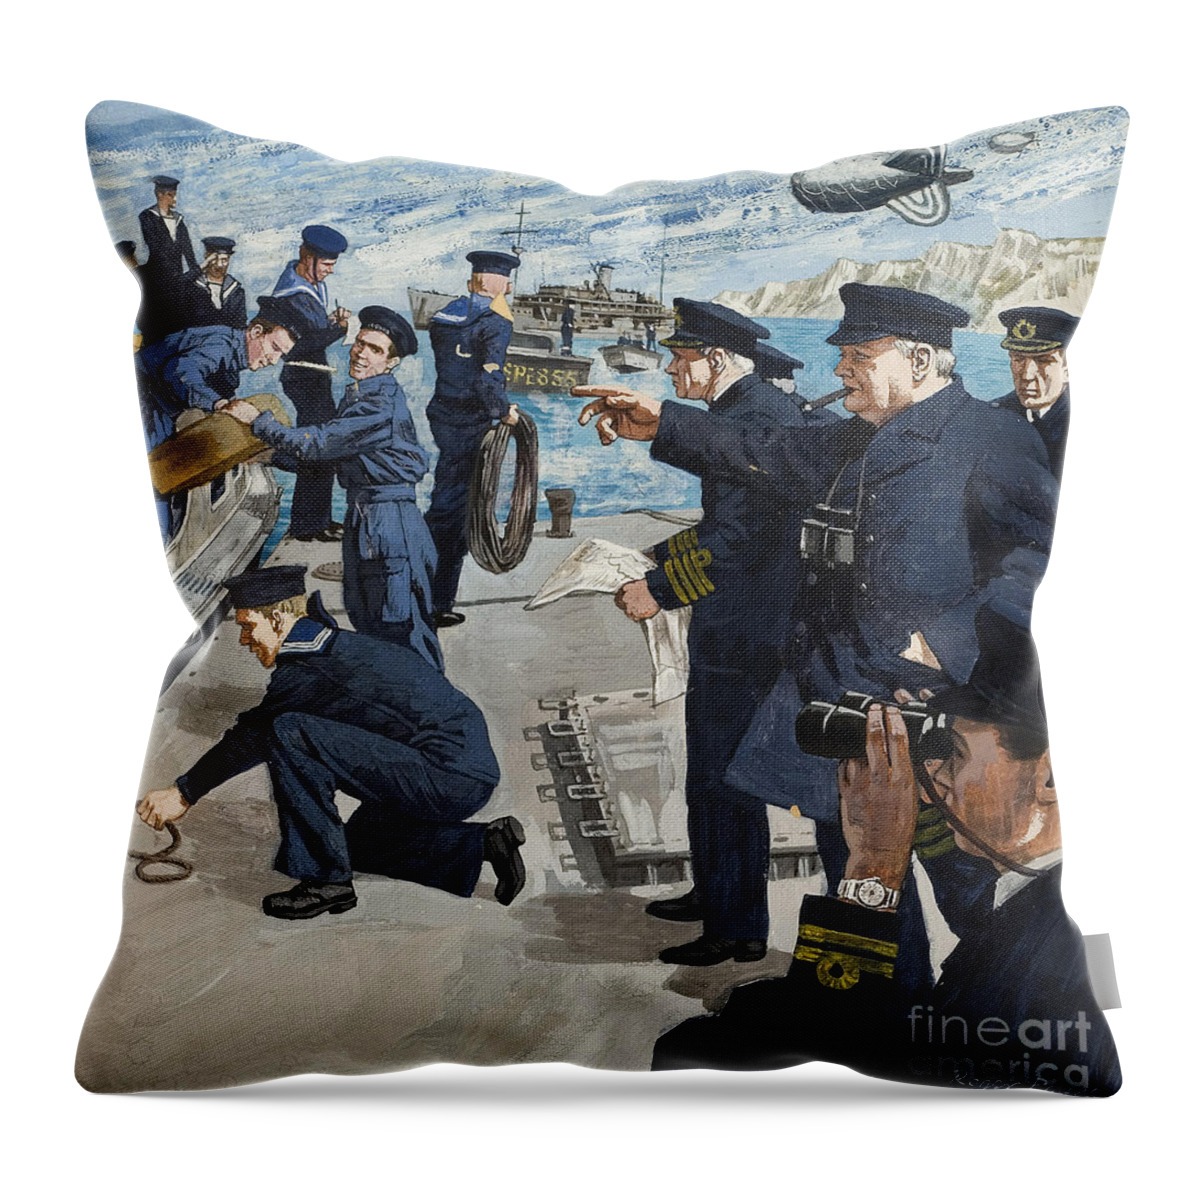 Winston Throw Pillow featuring the painting Winston Churchill In Naval Scene by Roger Payne